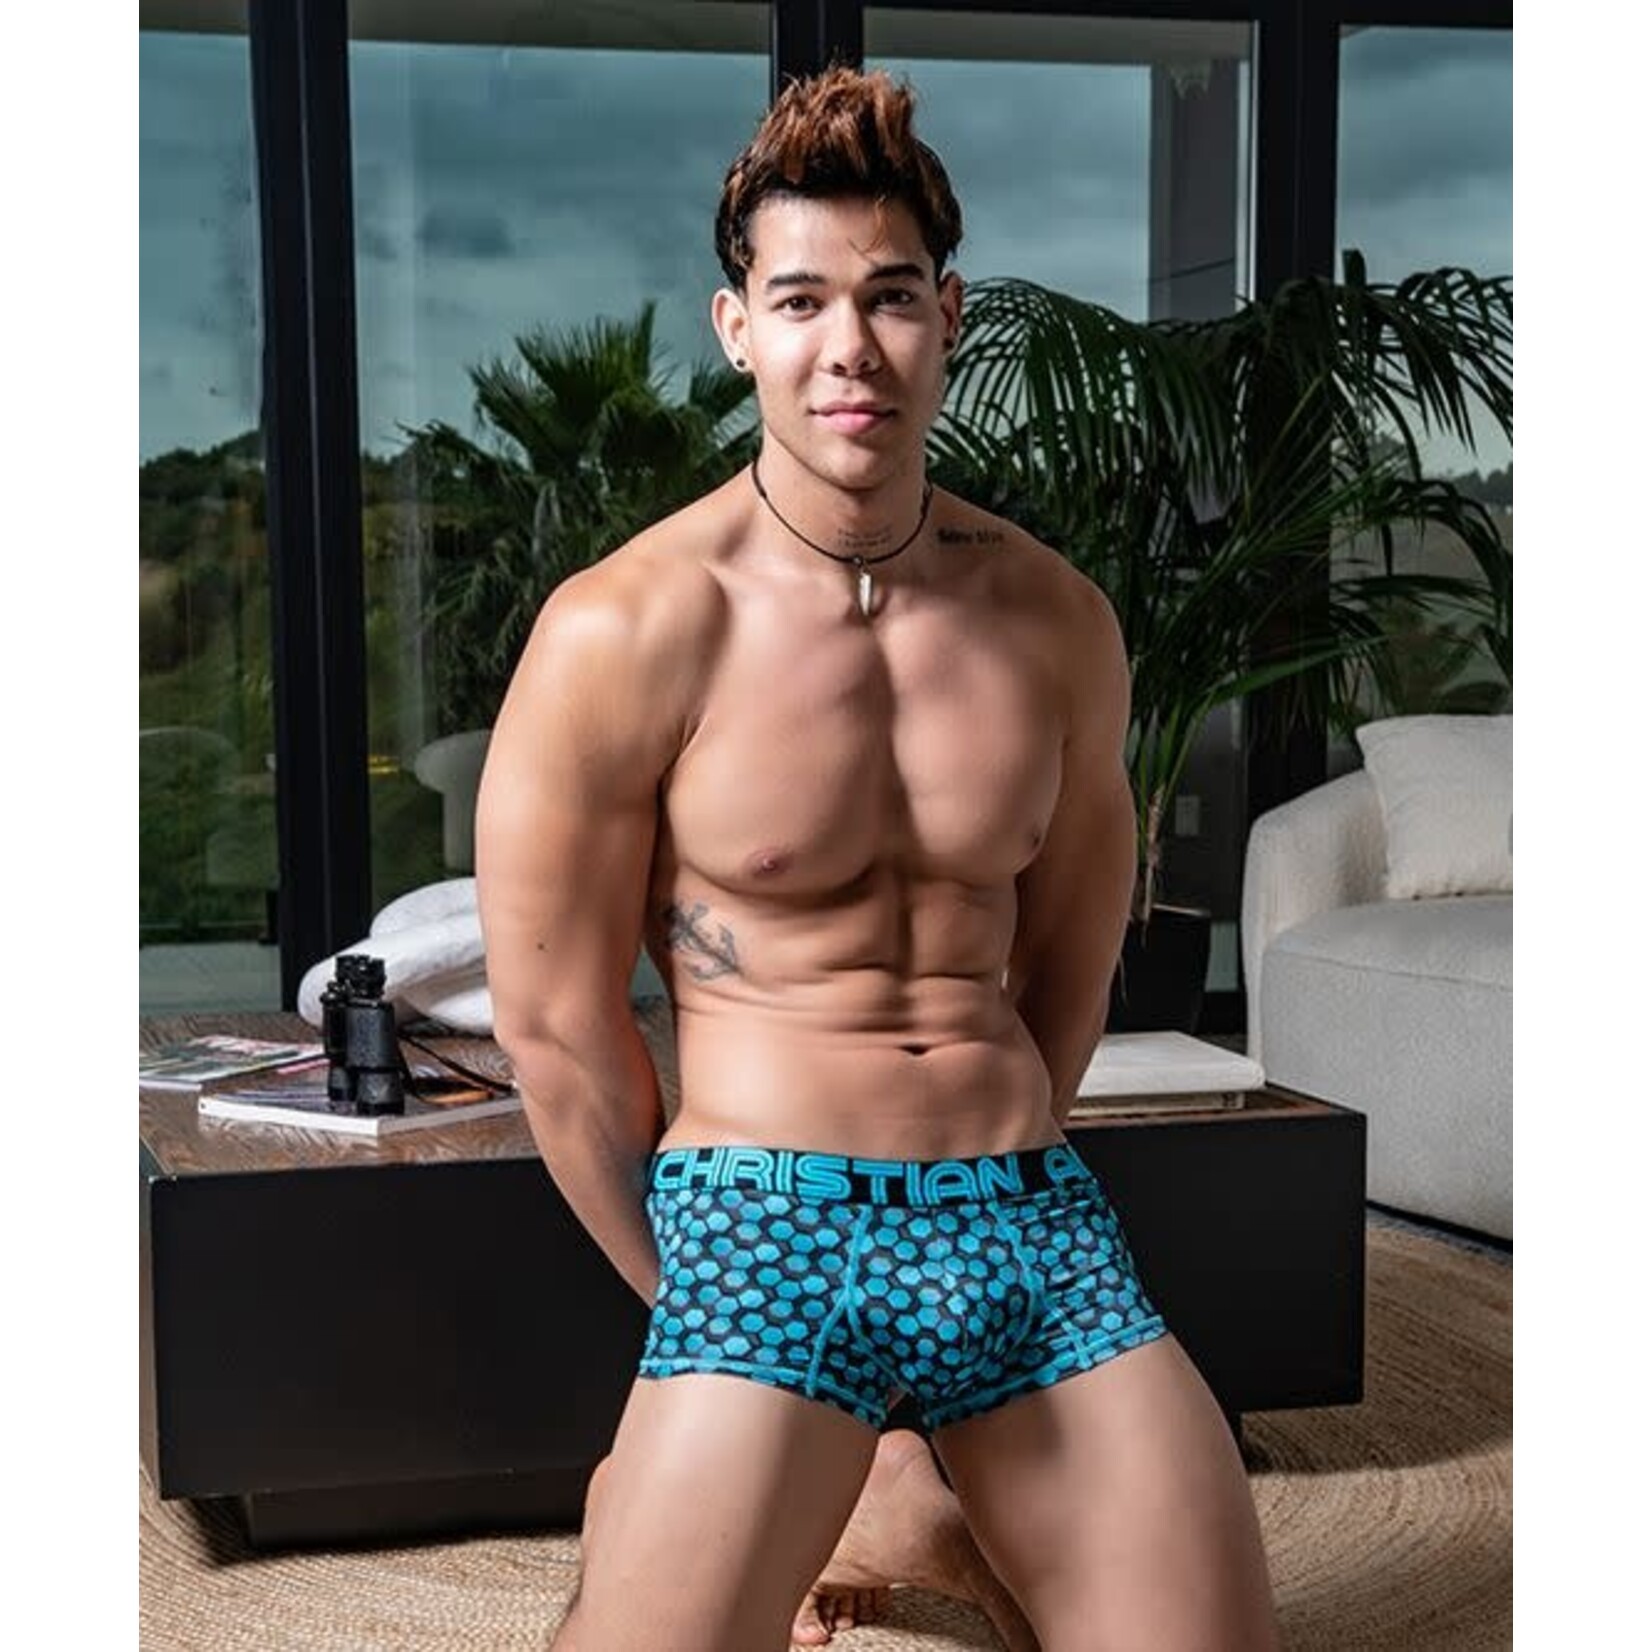 ANDREW CHRISTIAN ANDREW CHRISTIAN - VIBE SPORTS BOXER LARGE